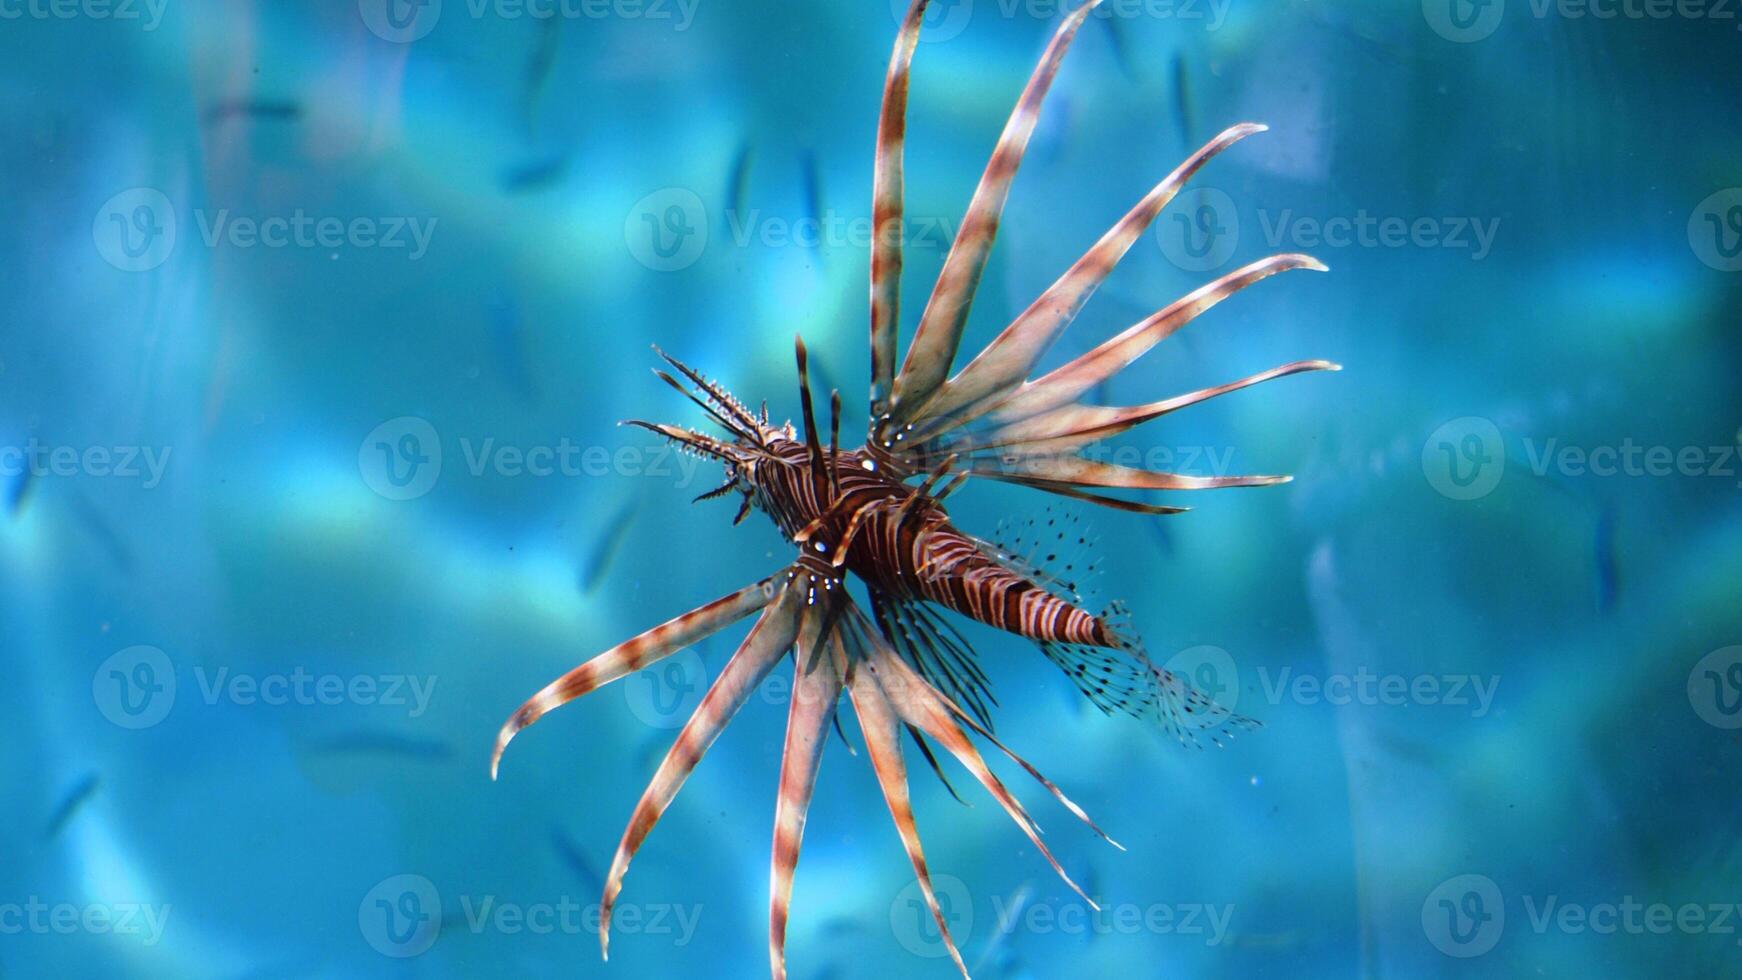 Lionfish or Pterois, a beautiful predatory Lion Fish swims in search of food underwater photo